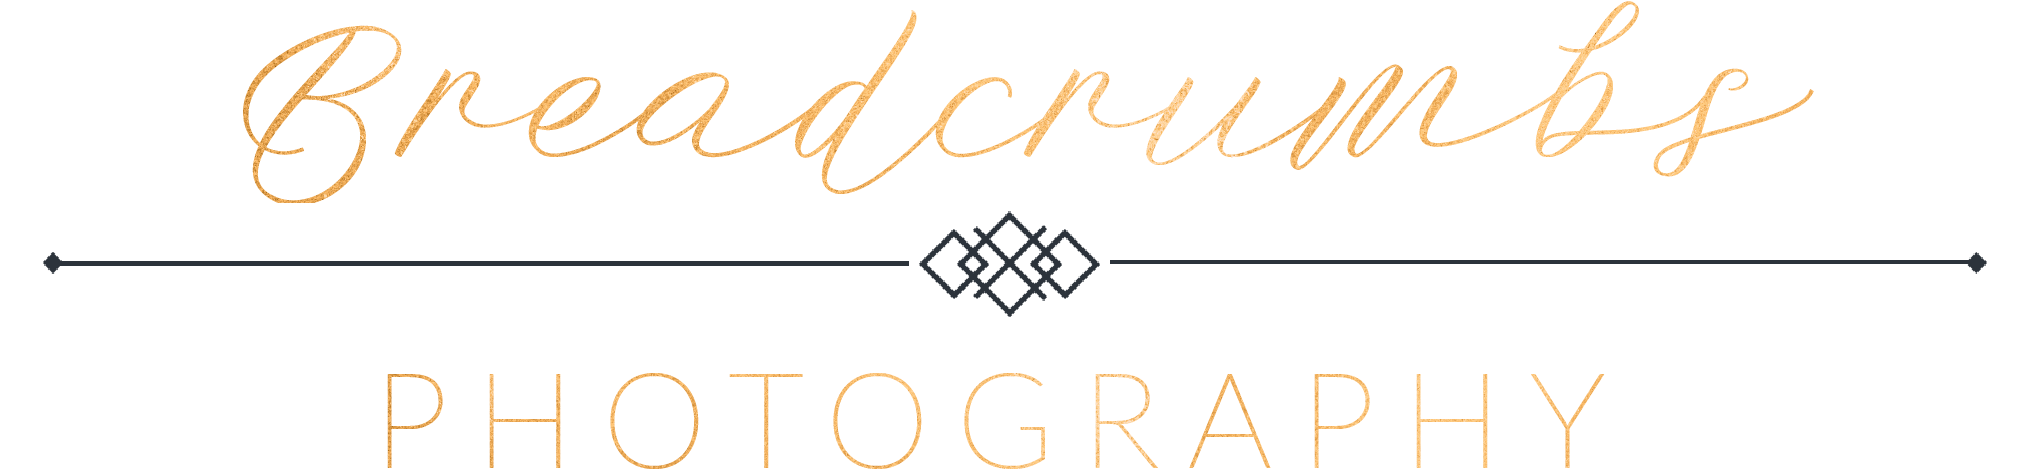 Breadcrumbs Photography Logo PNG image